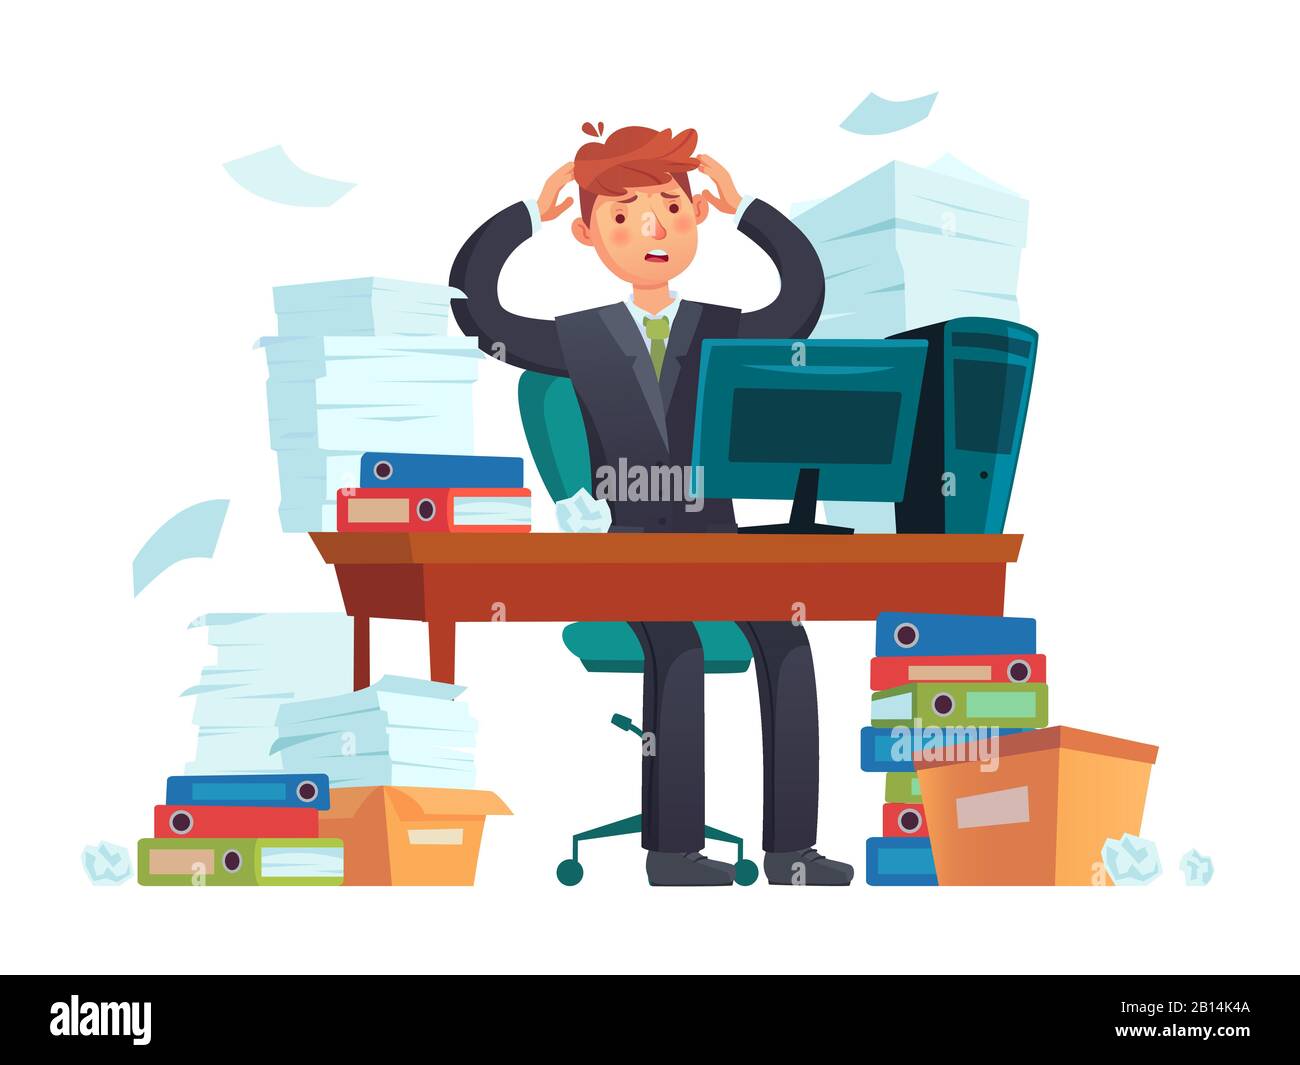 Manager overworked. Office overwork, unorganized paperwork and business work document sheets piles cartoon illustration Stock Vector